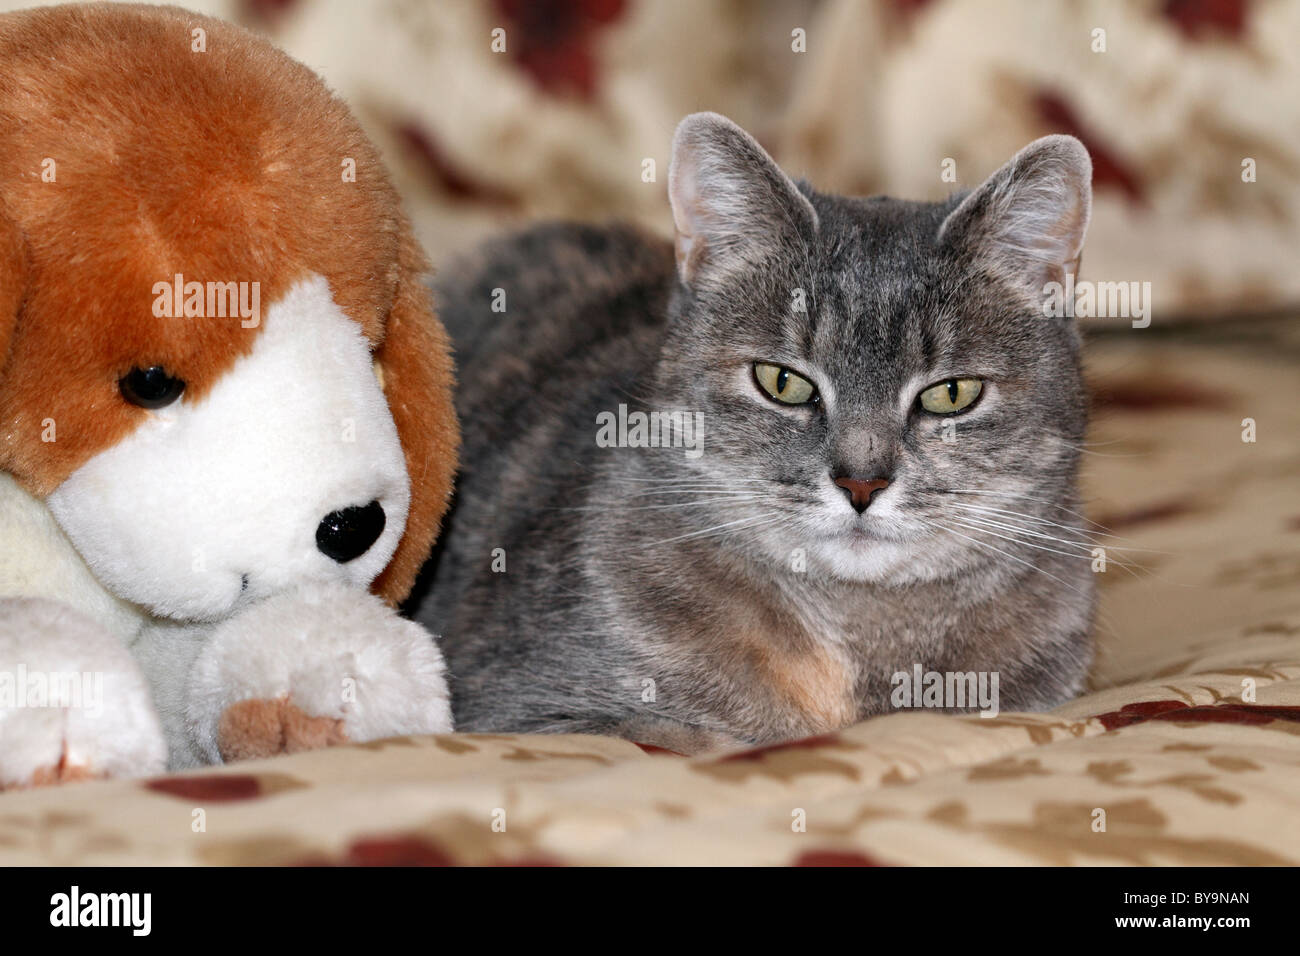 A House Cat sitting next to its friend - a stuffed Beagle Dog toy. Photo is of the Photographer's Mother's cat. Stock Photo